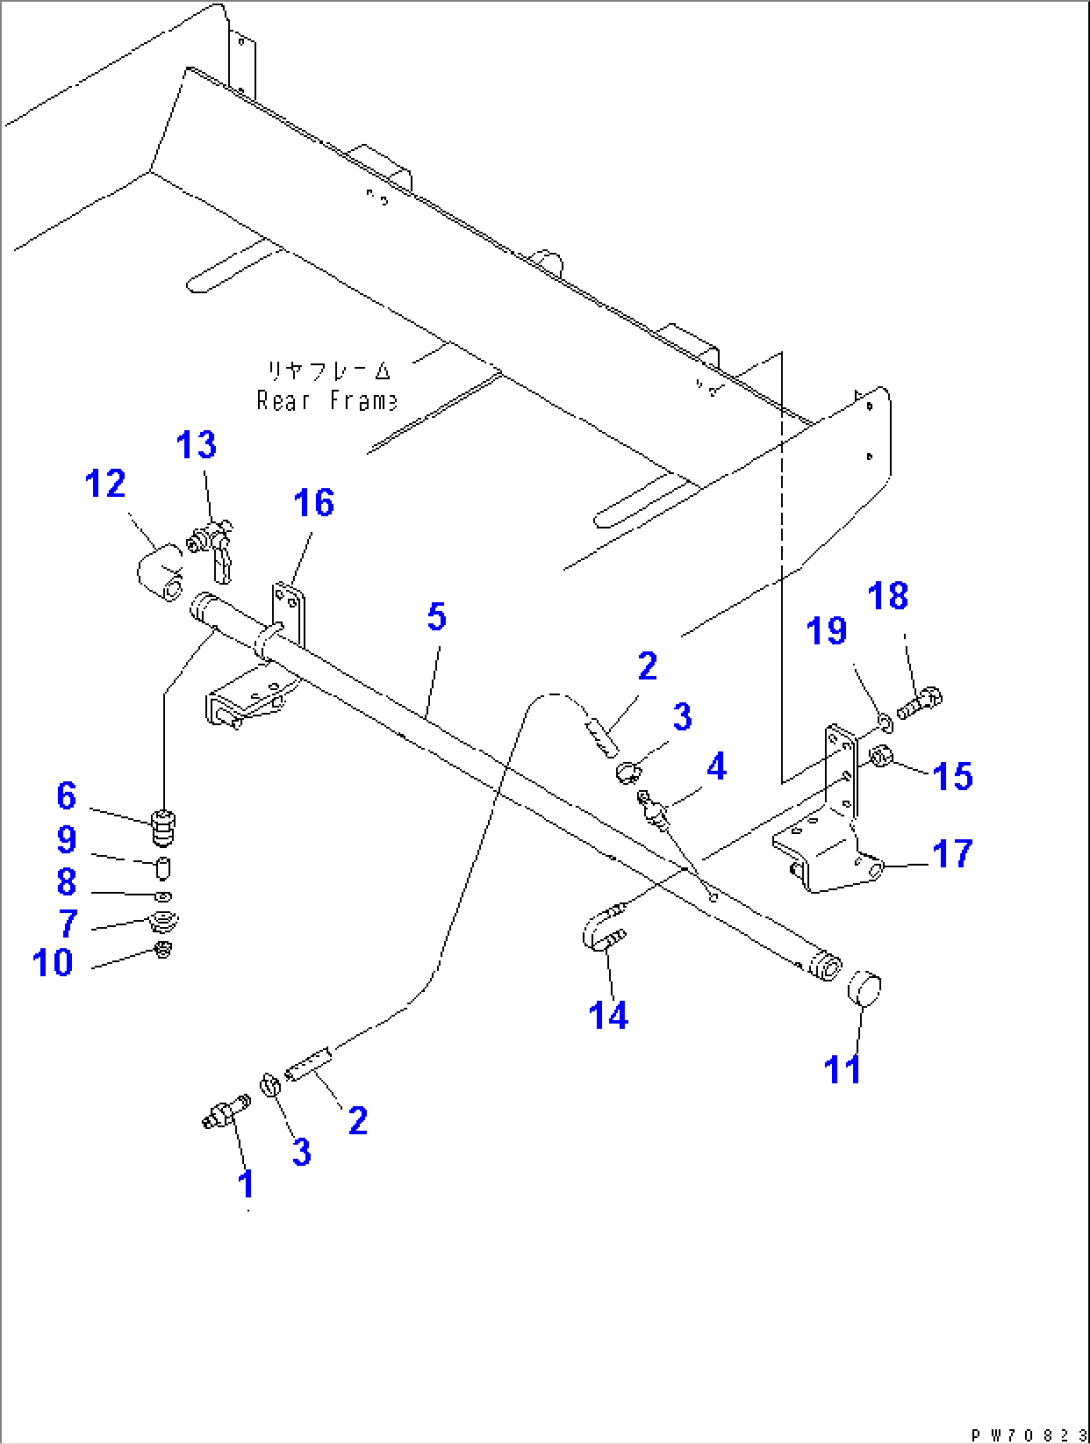 WATER SPRAY PIPING (3/3) (WATER PUMP TO REAR NOZZLE)